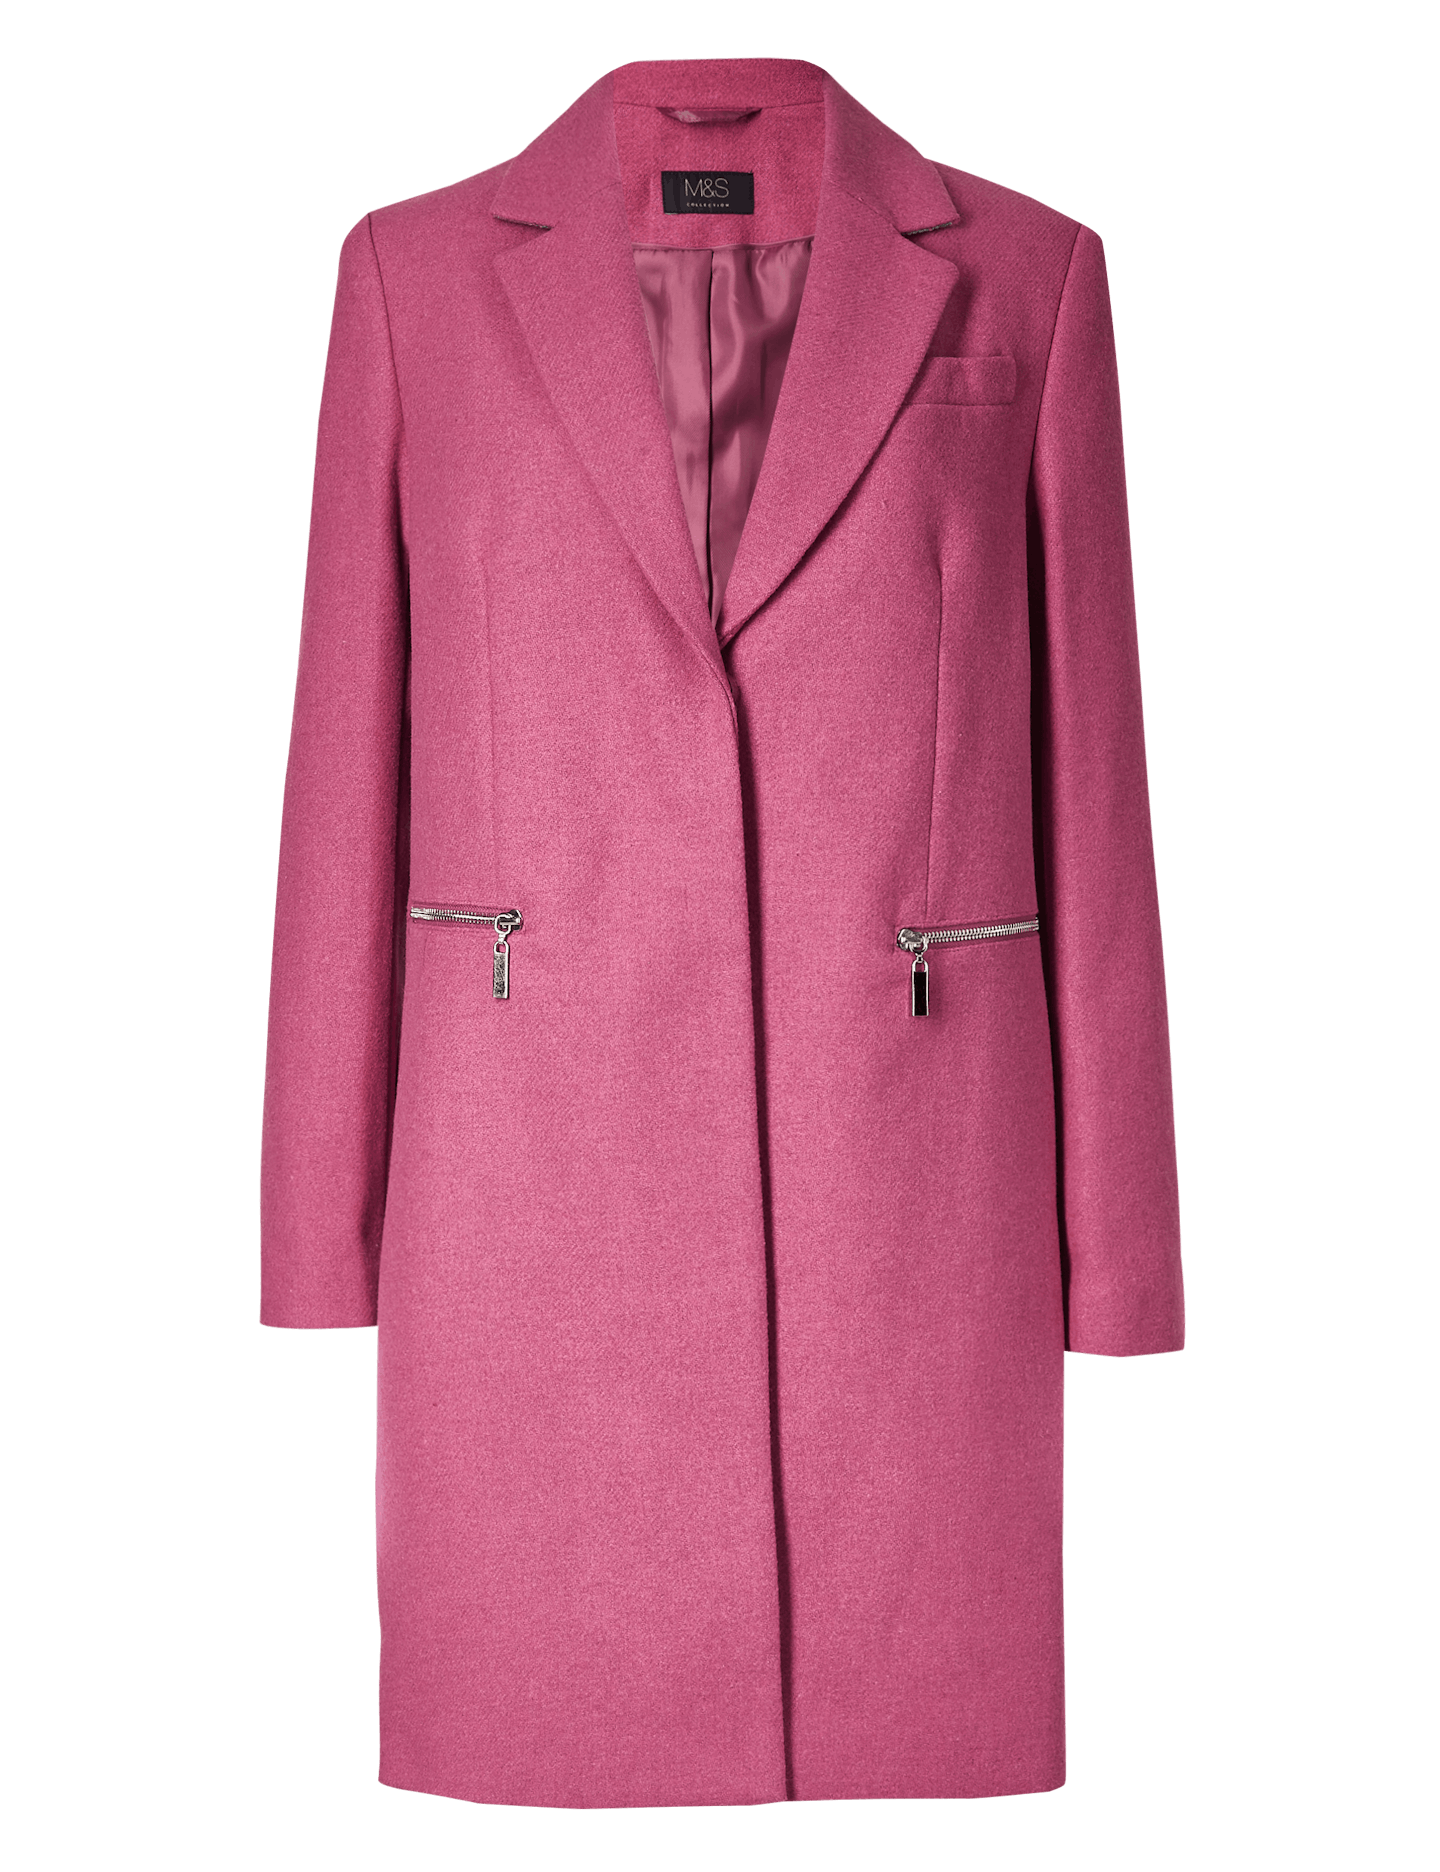 holly willoughby clothes